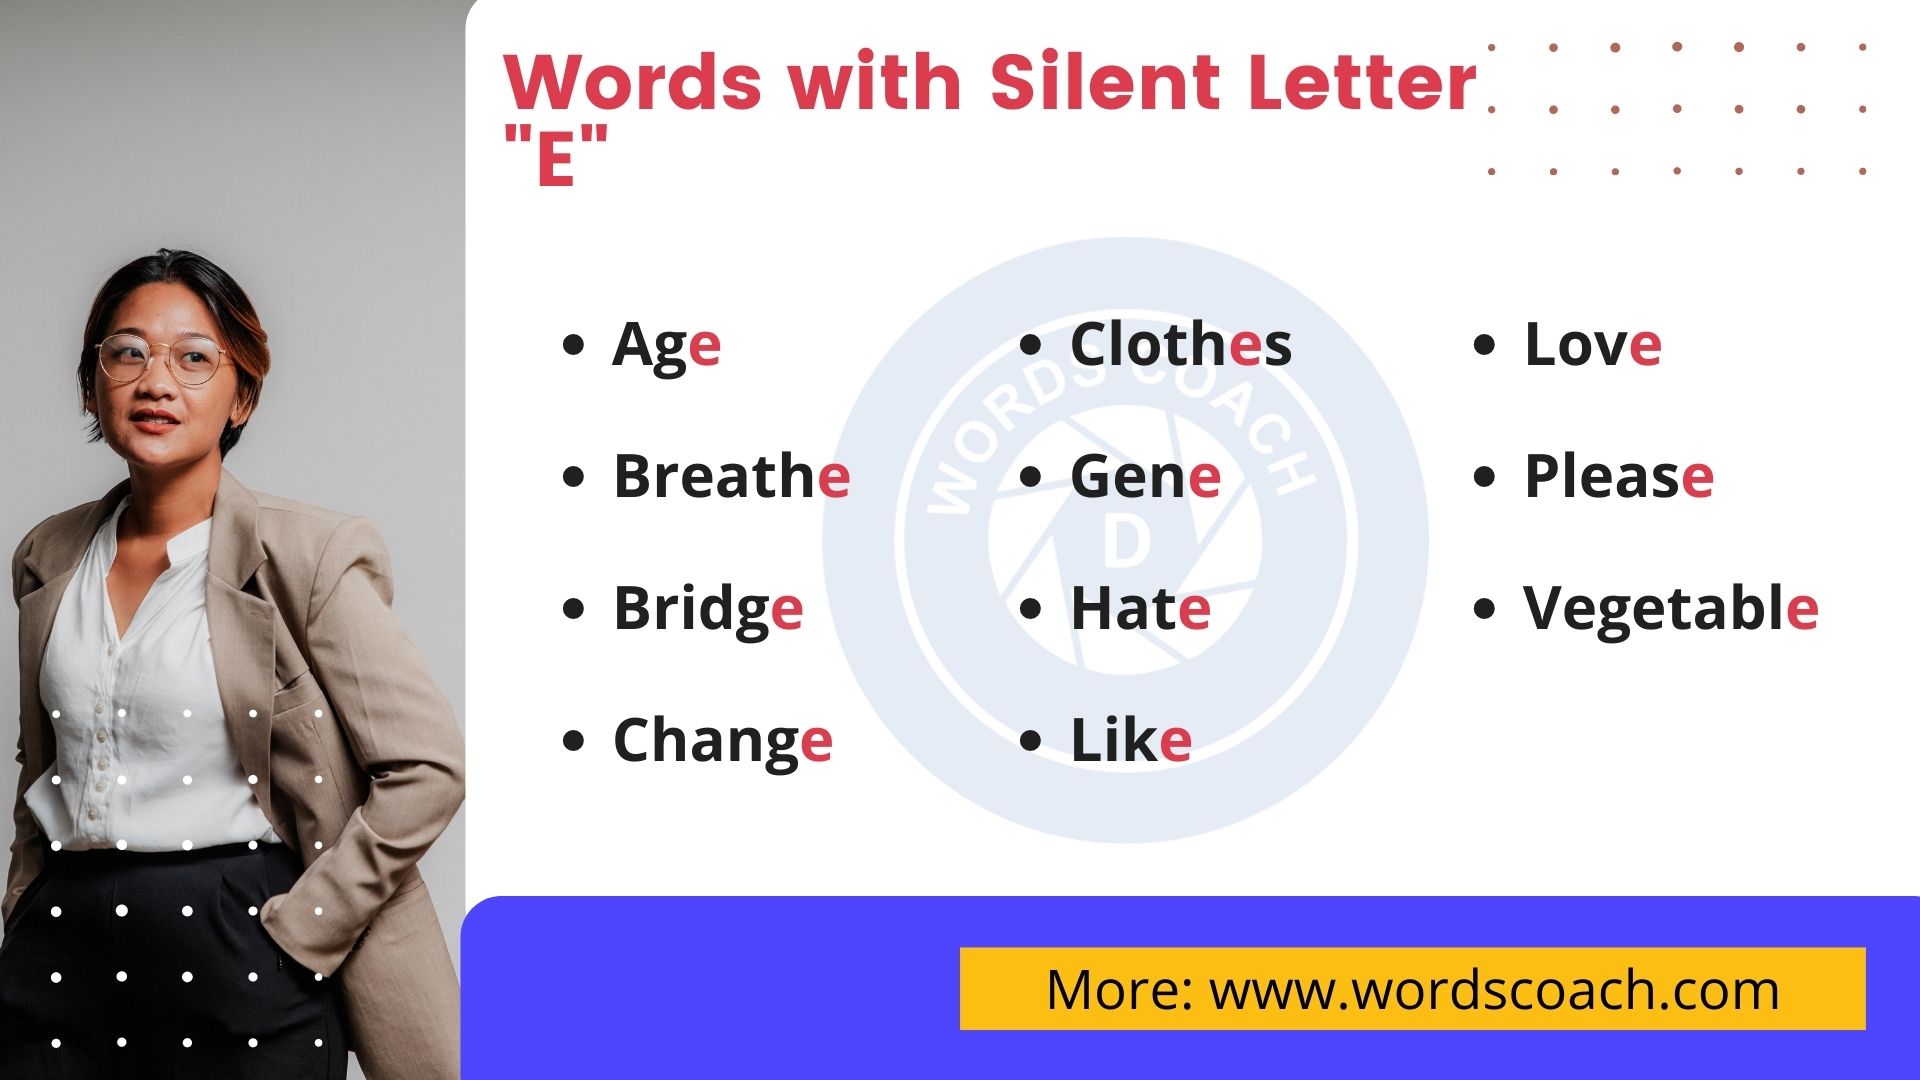 Words with Silent Letter E - wordscoach.com